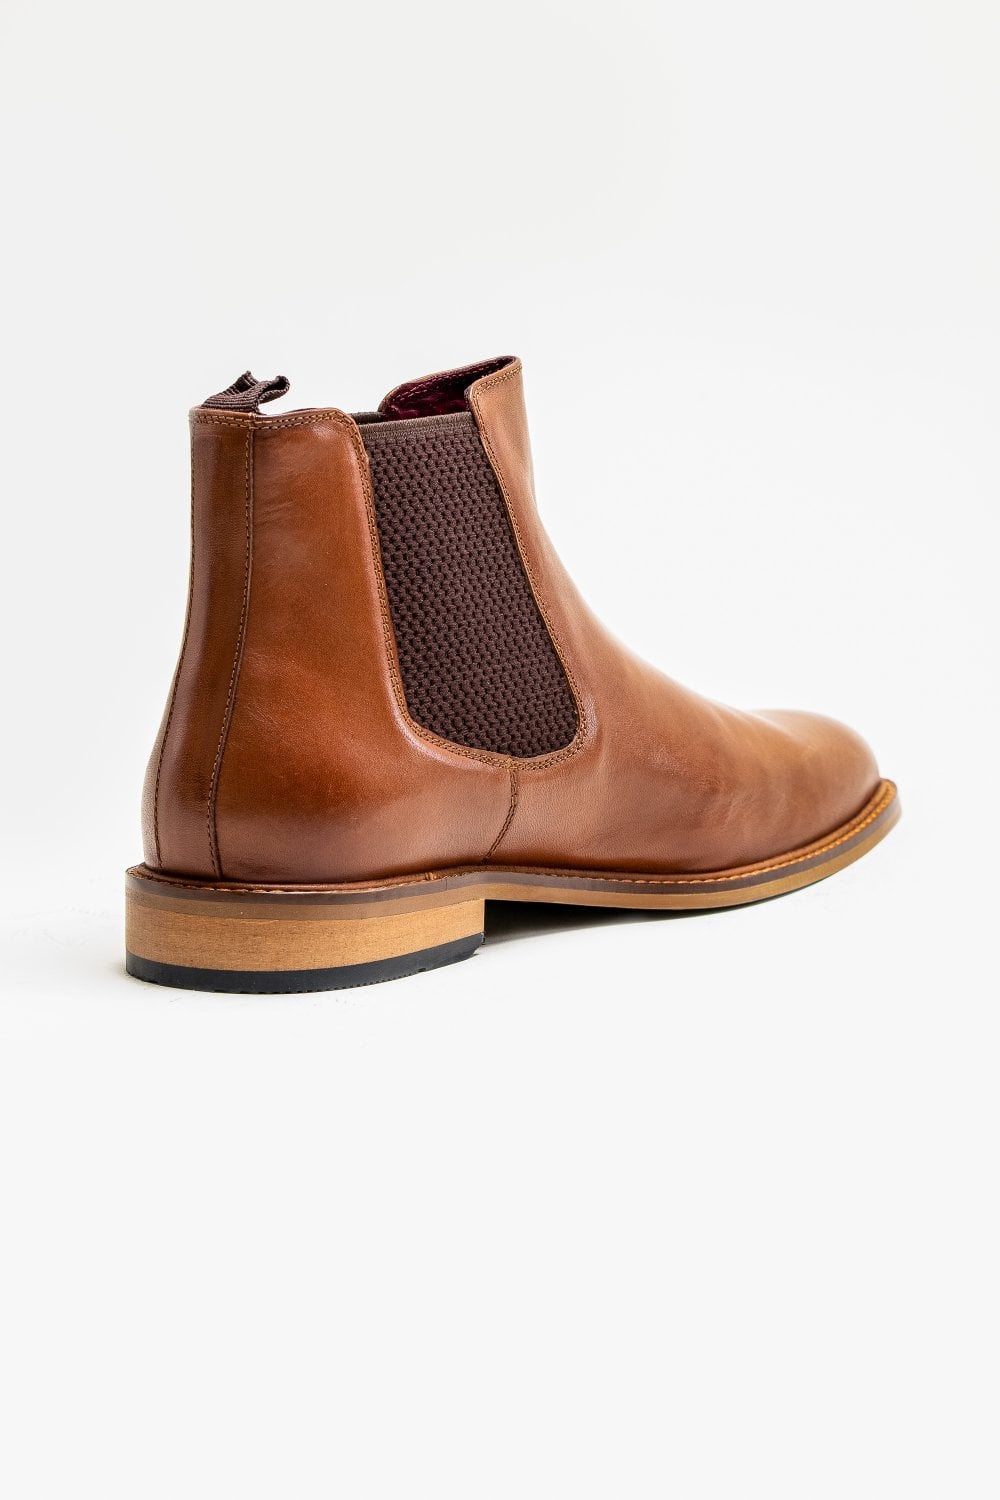 Cavani Watson Dealer Style Boots in Traditional Tan Leather